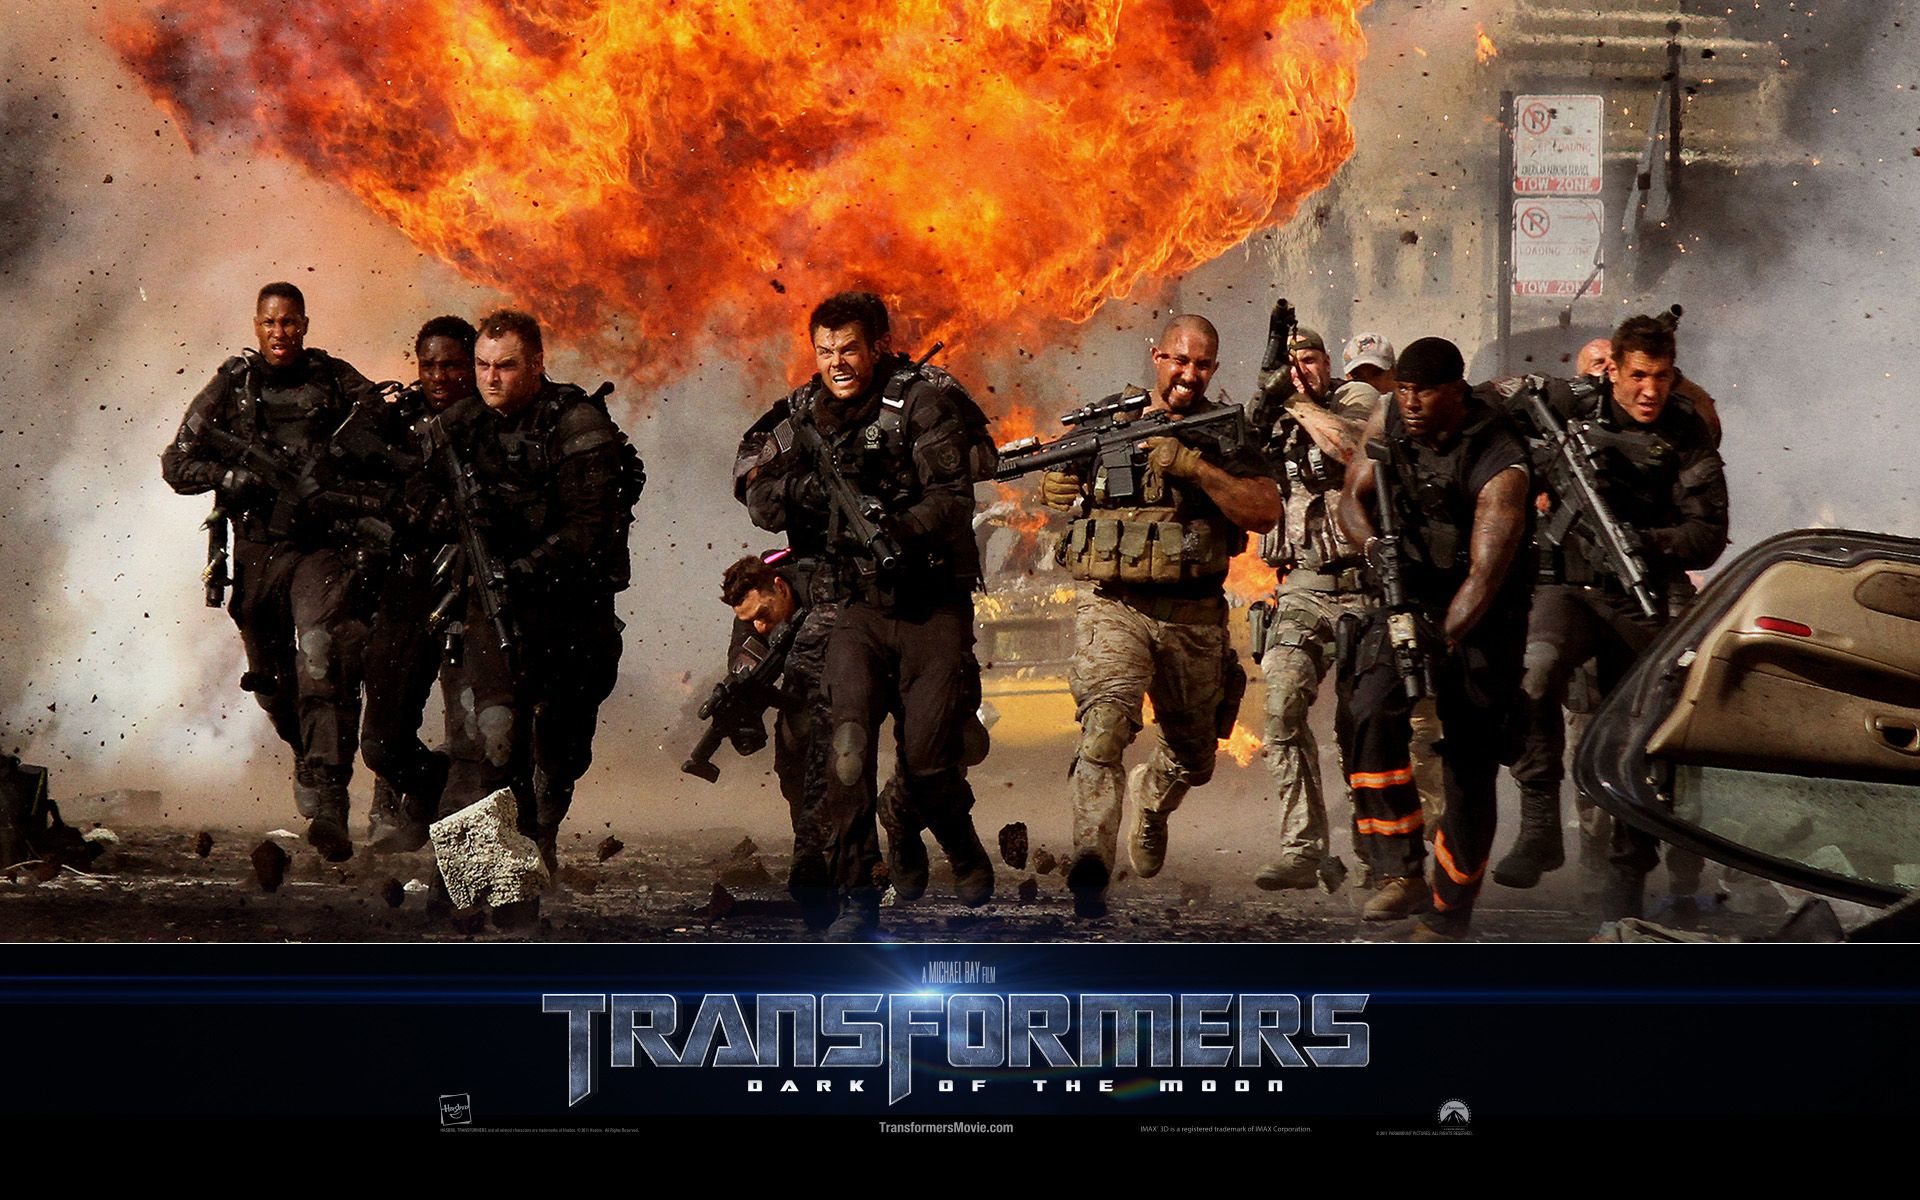 Military in Transformers 3 # 1920x1200. All For Desktop